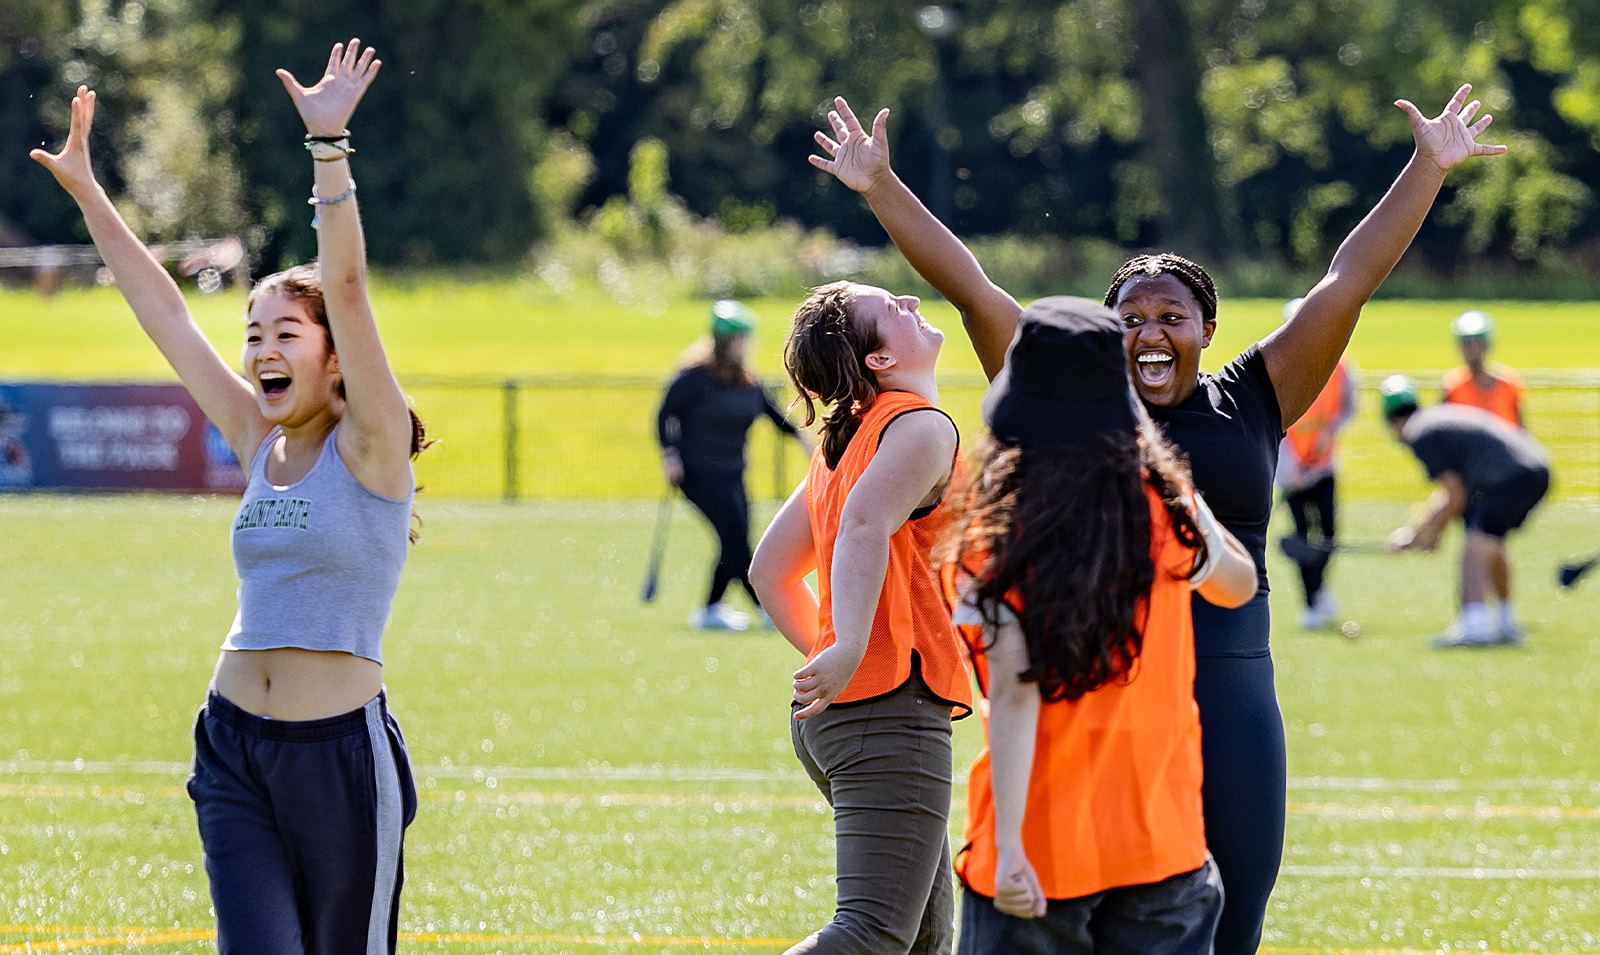 Students, some wearing orange pinnies, raising their arms in celebration while doing a group sport activity on a turf field.